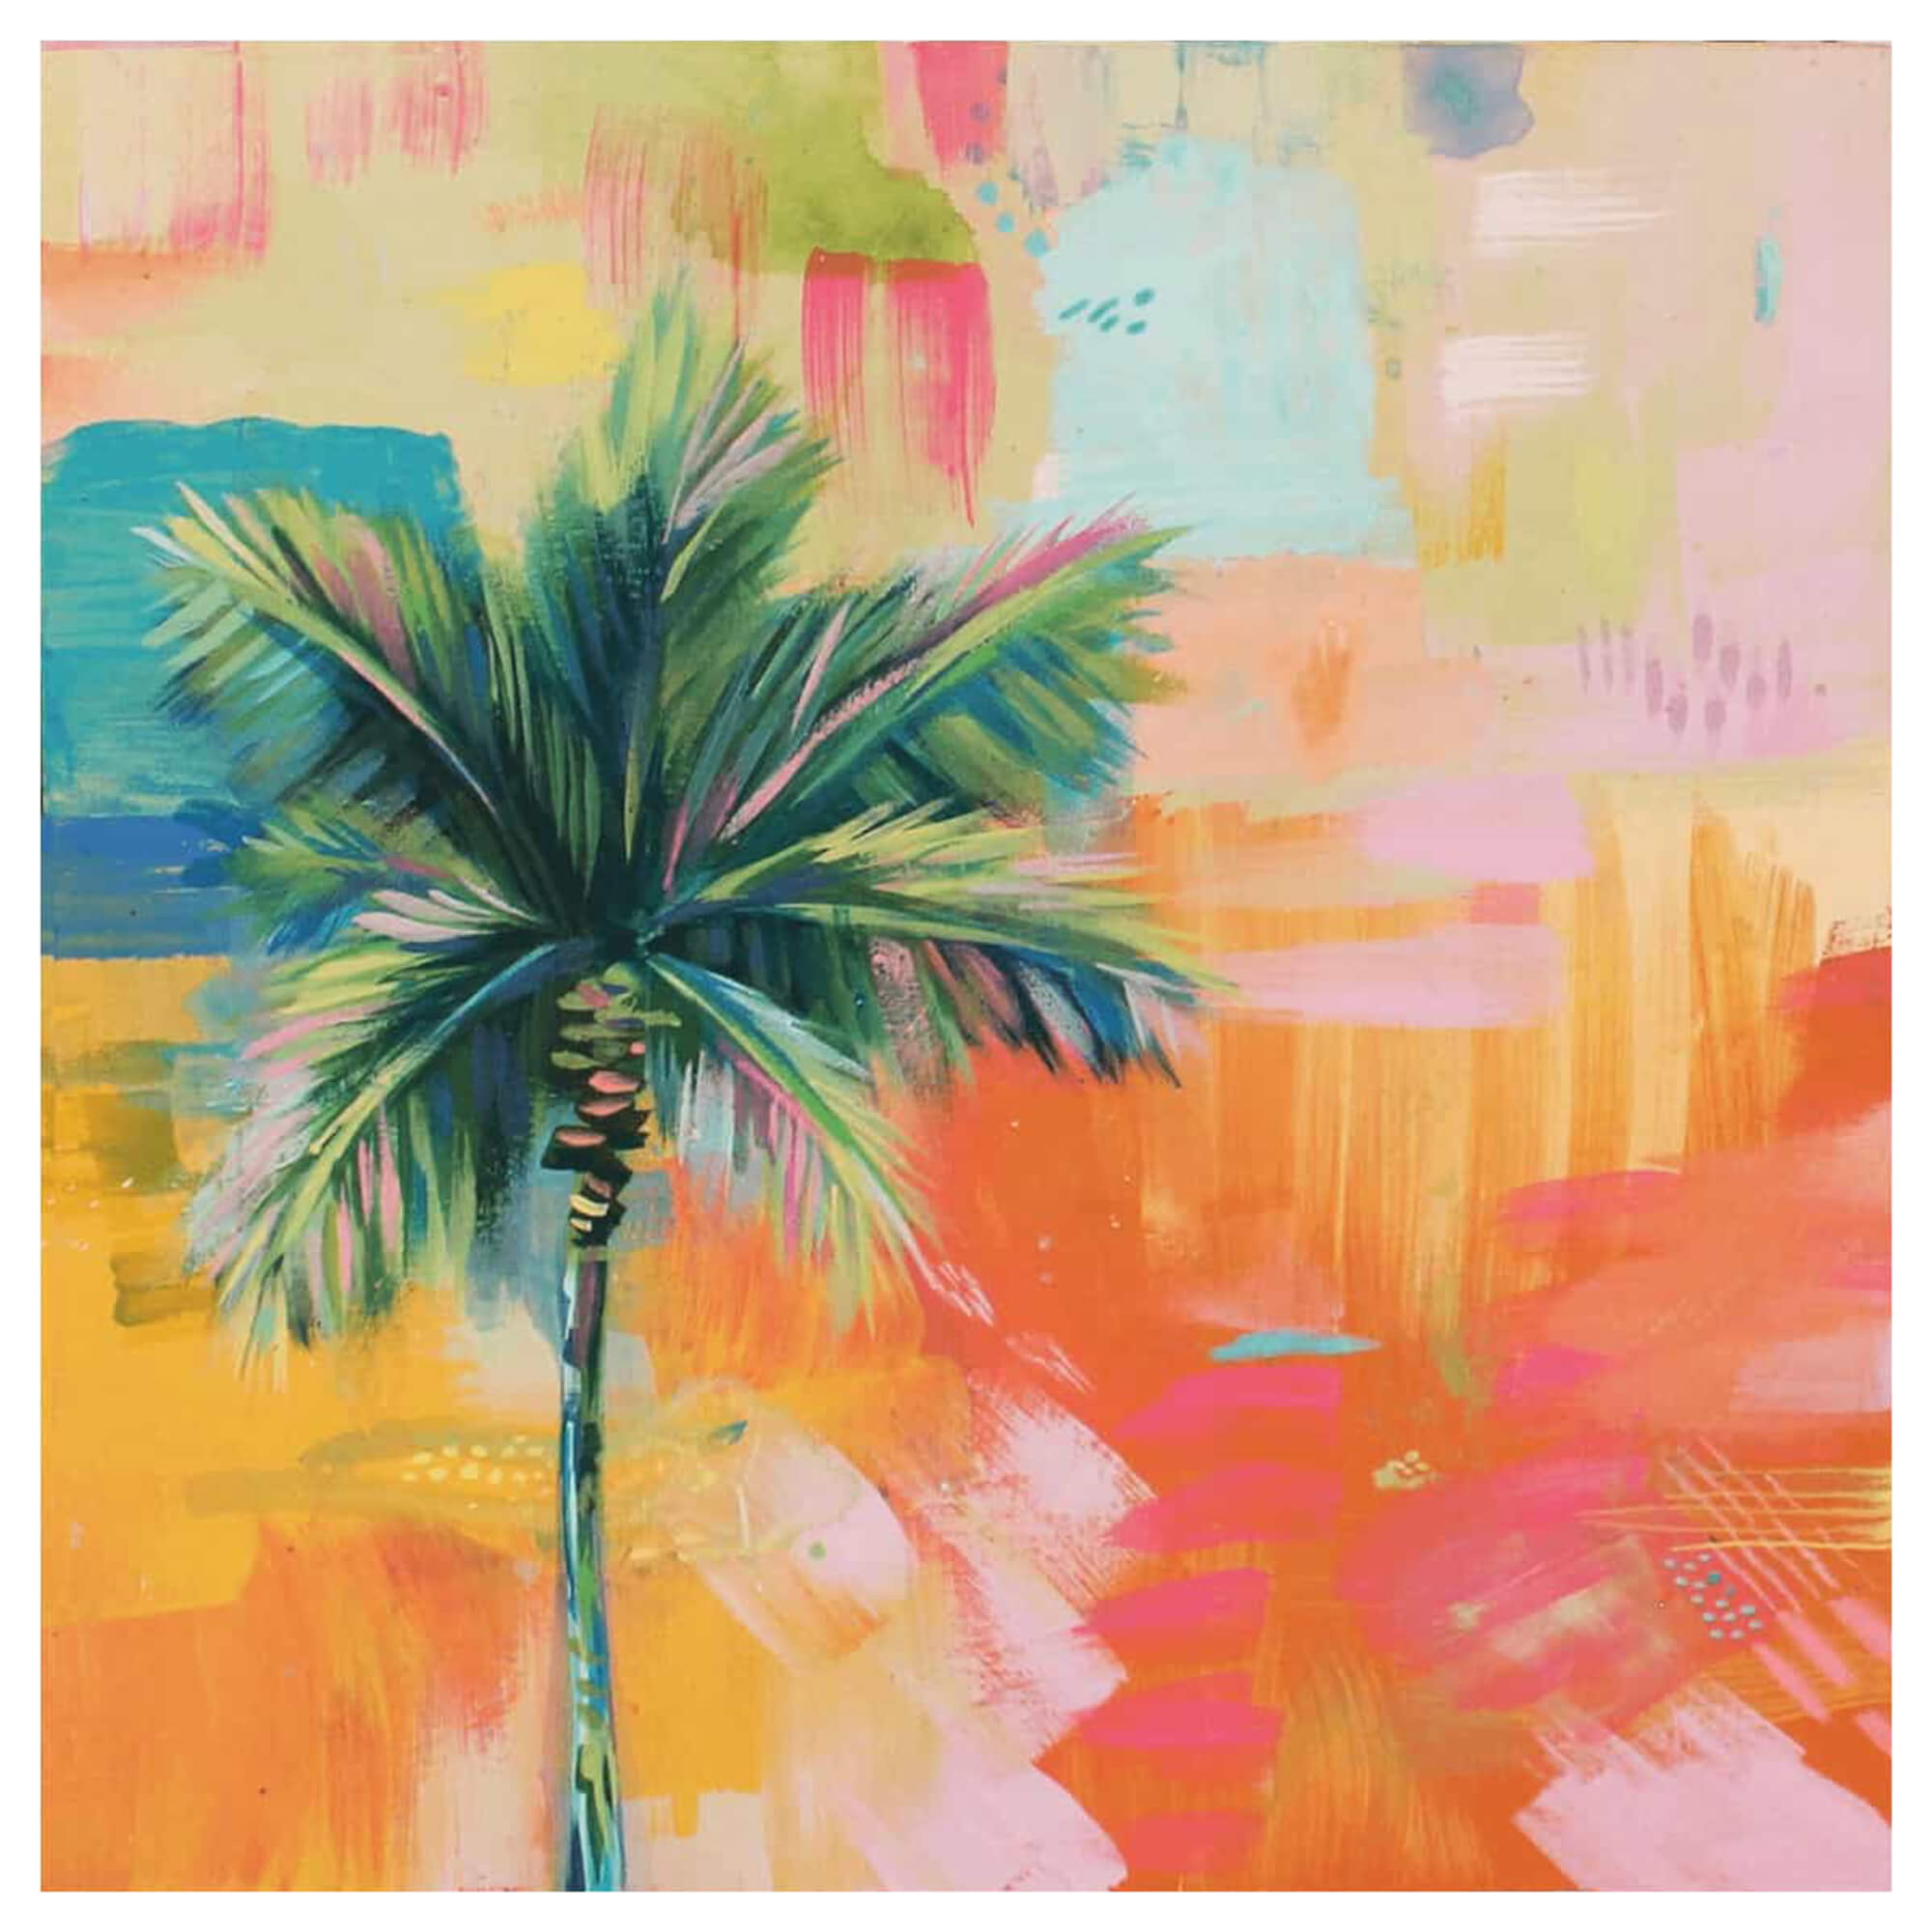 A colorful art print of a palm tree against an orange, pink and blue multi-layered backdrop by Hawaii artist Lauren Roth